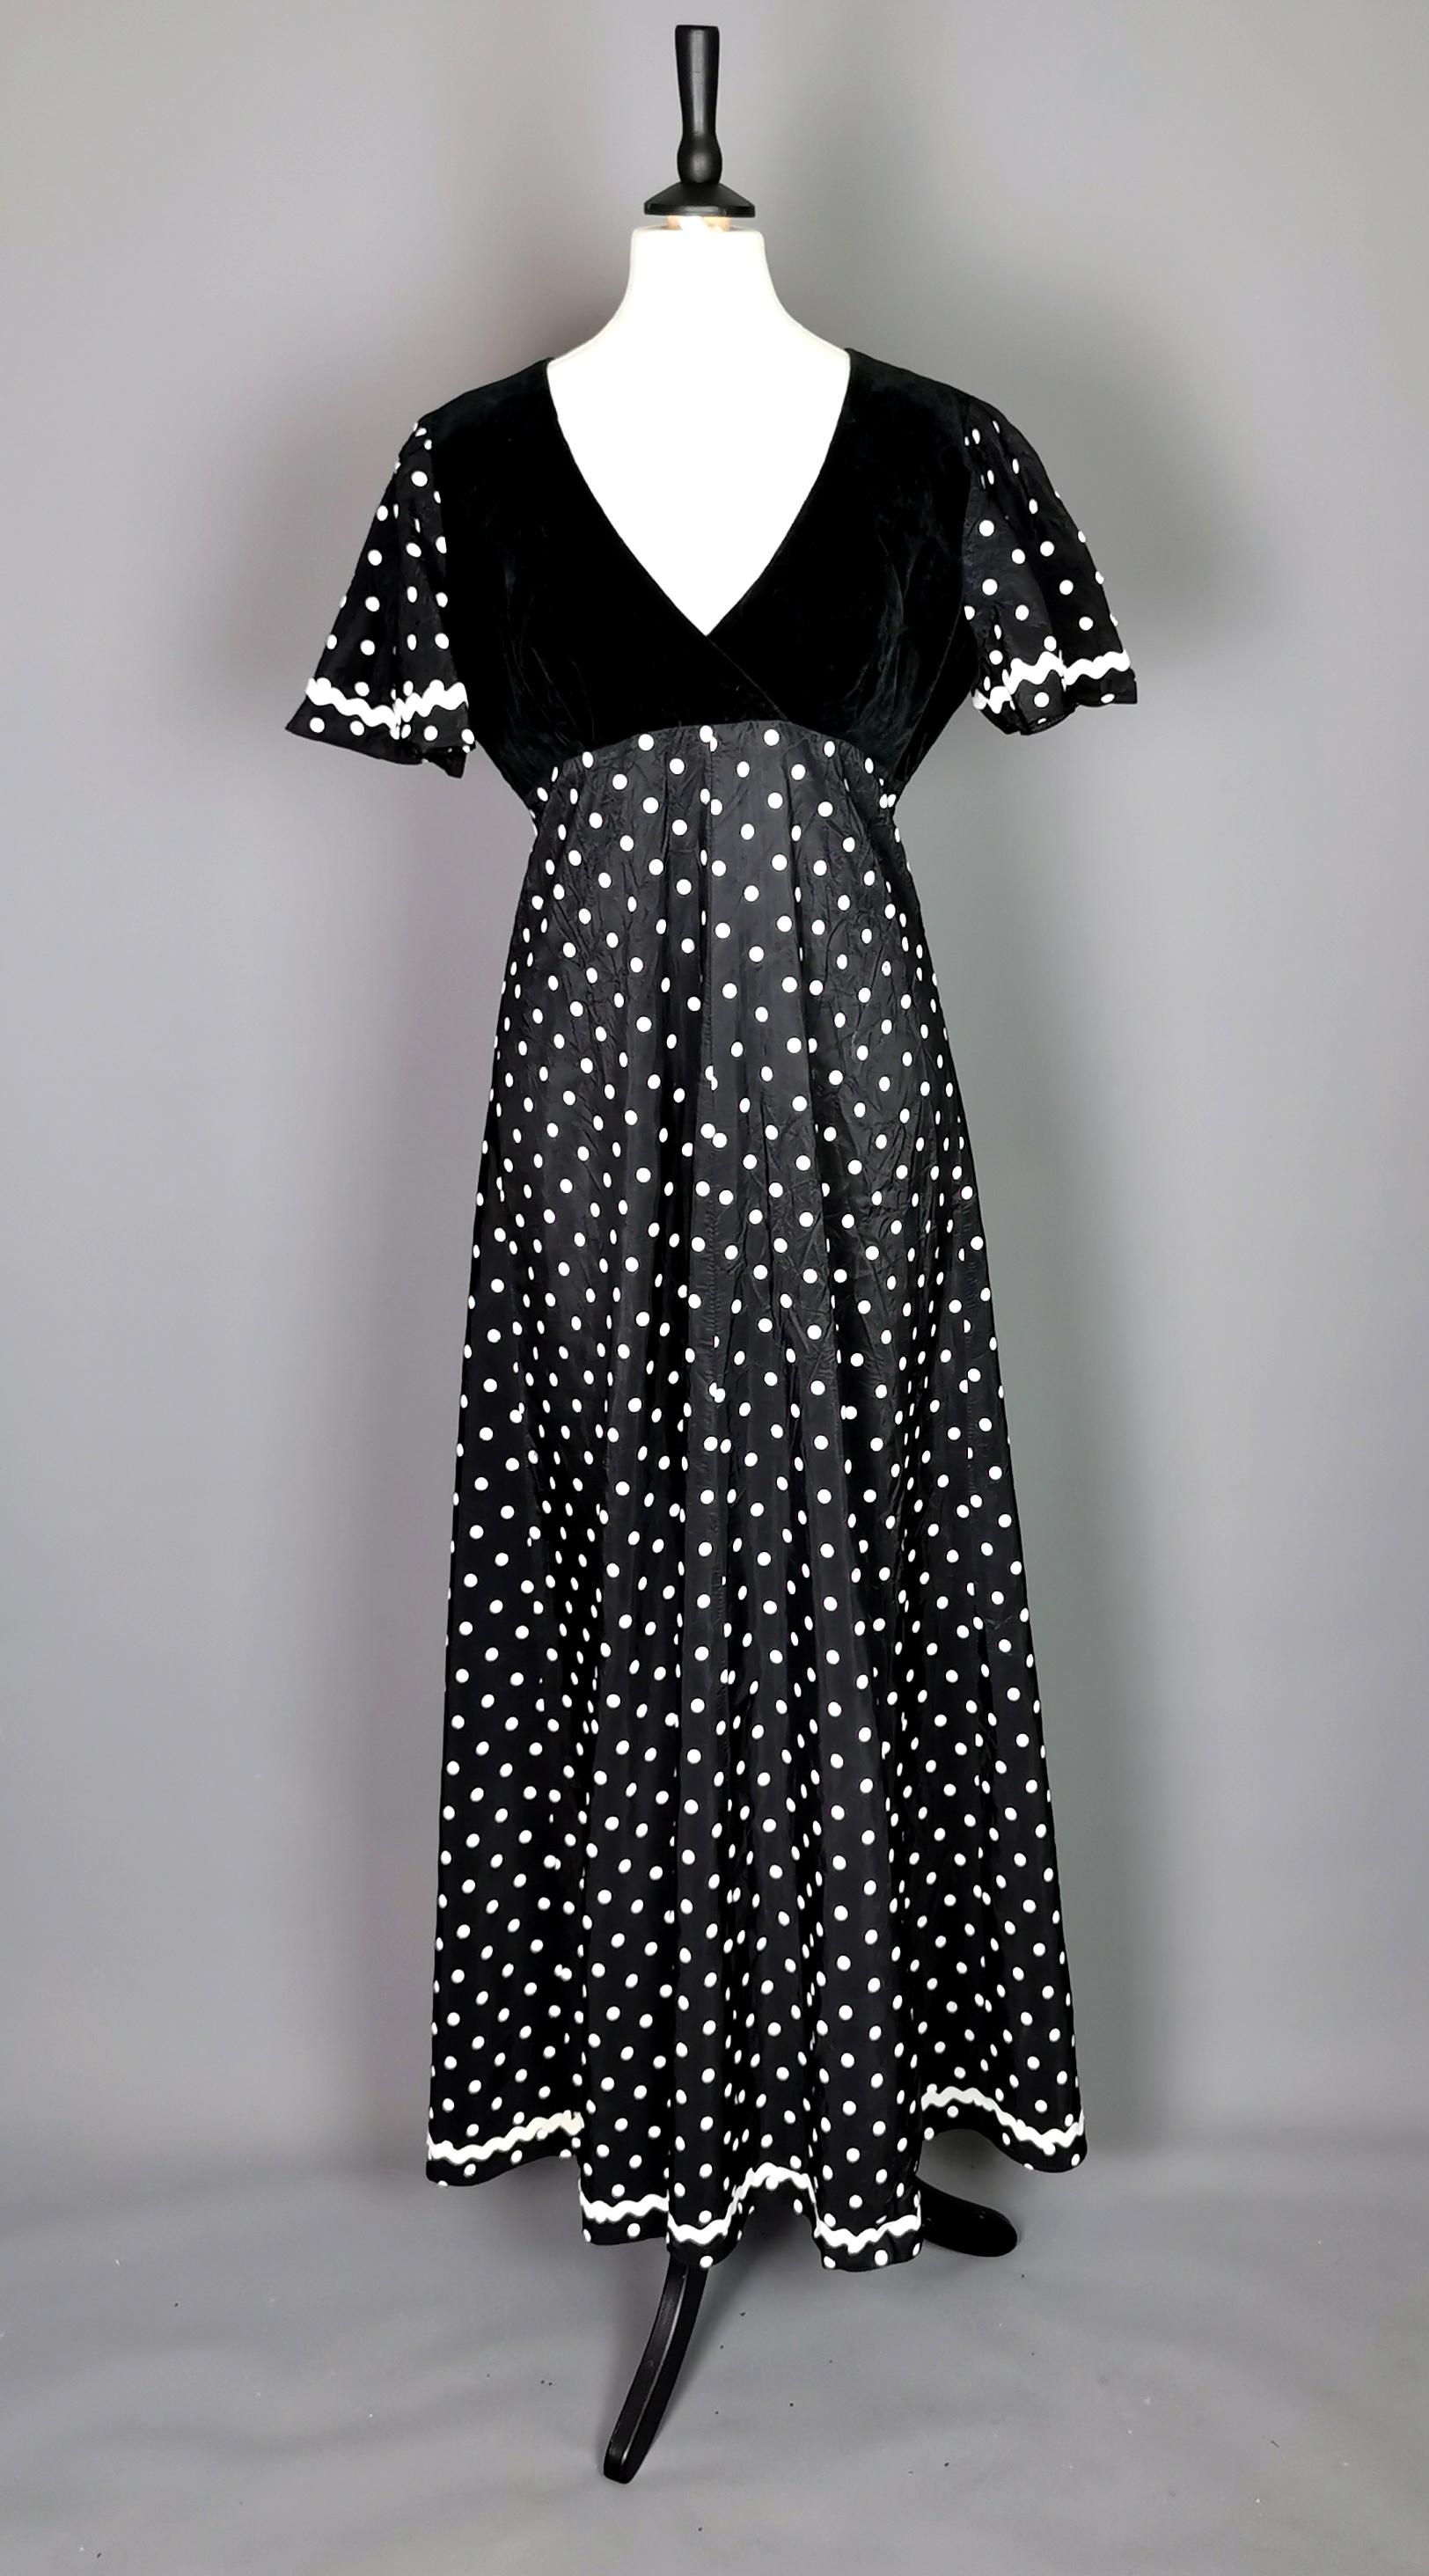 A fab vintage 1970s maxi dress by Dolly Rockers.

Made in England from a rayon / nylon synthetic blend fabric with a slightly shiny finish, it has an all over white polka dot design with a black velvet bodice and short sleeves.

An unusual Dolly